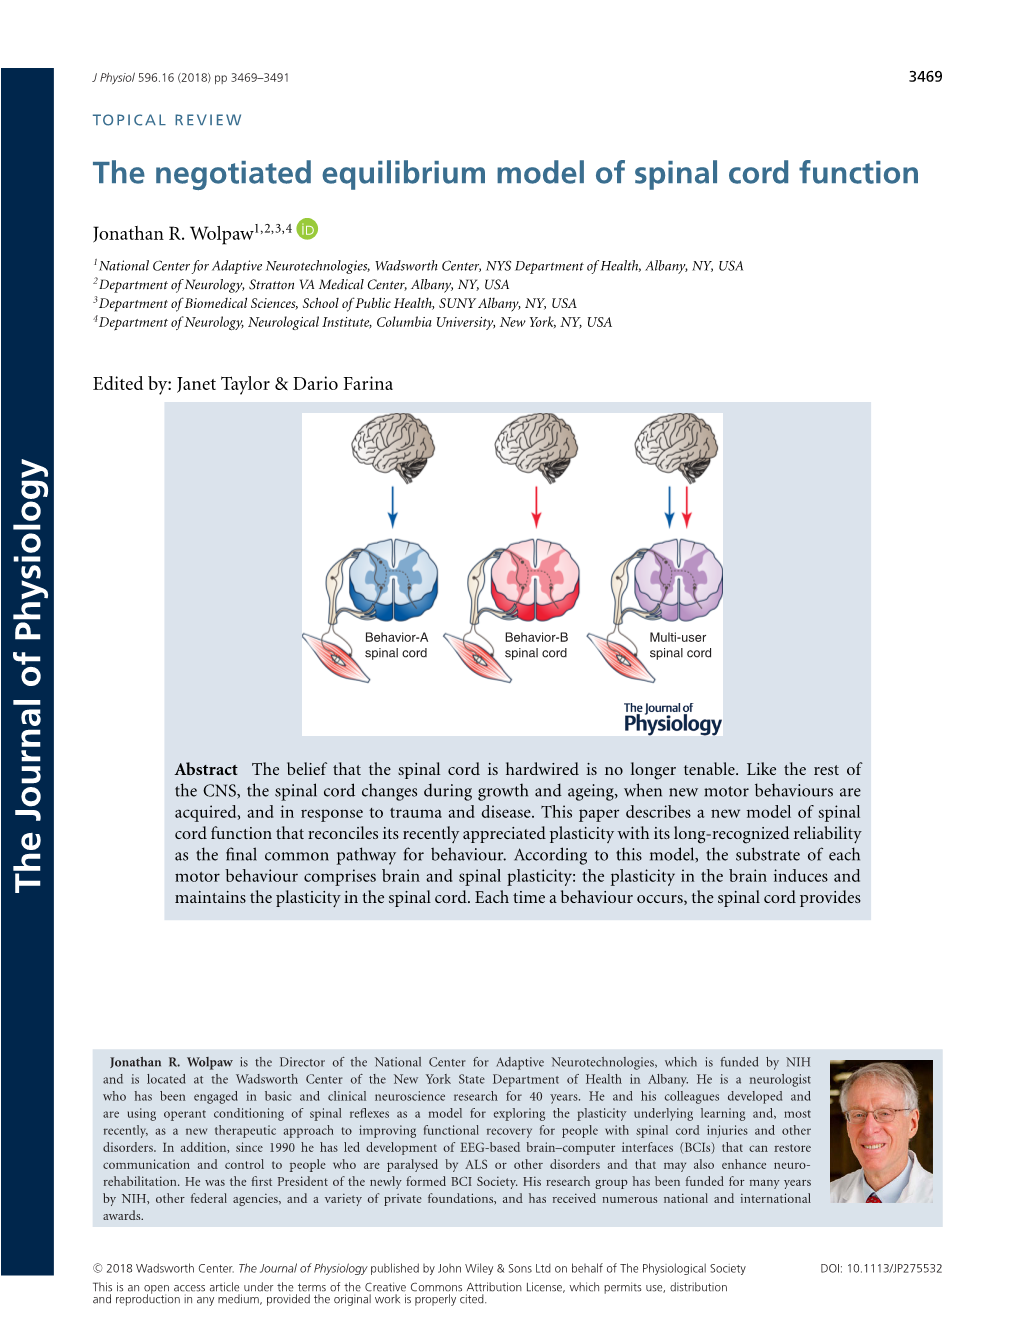 The Negotiated Equilibrium Model of Spinal Cord Function